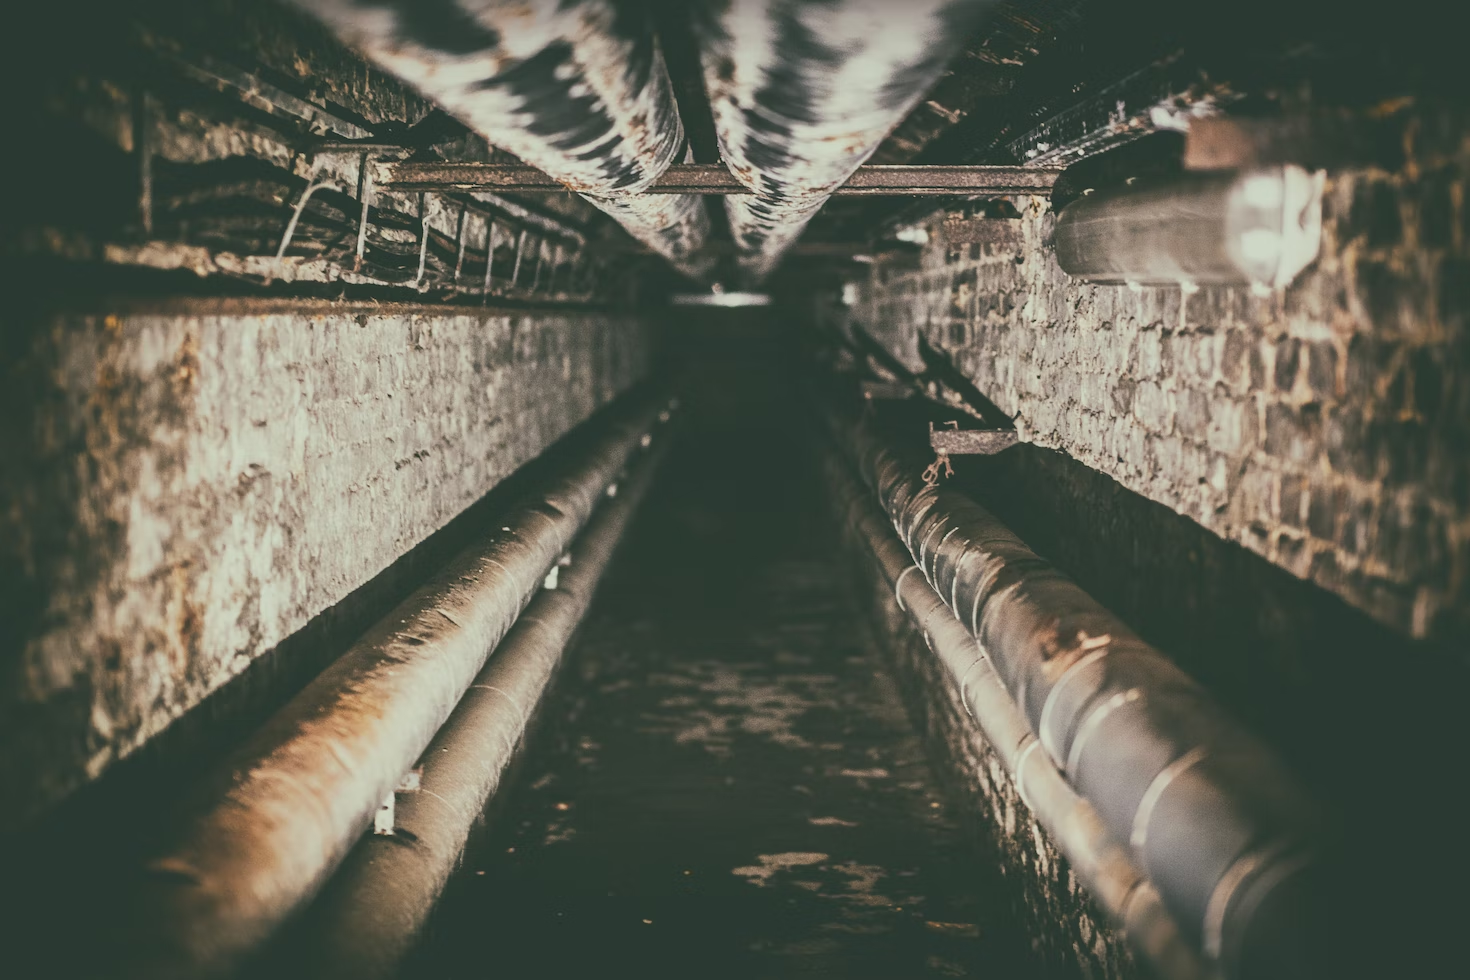 An image of underground sewer pipes